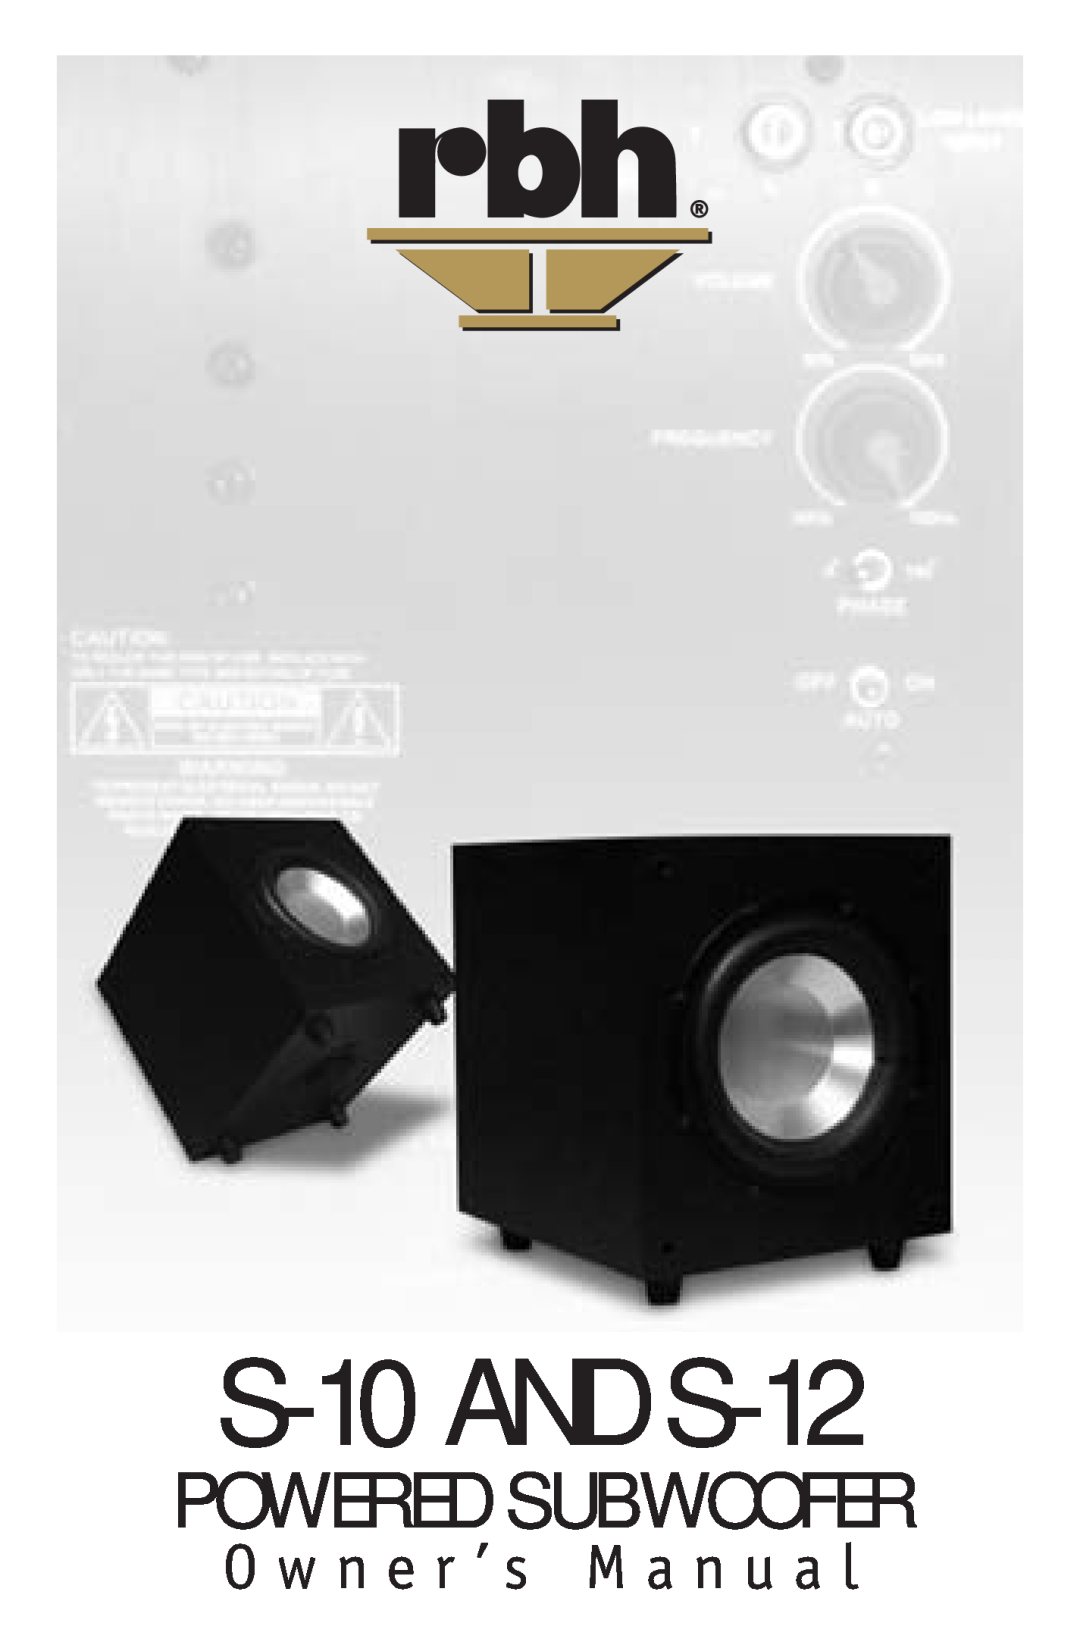 RBH Sound owner manual S-10AND S-12, Powered Subwoofer, O w n e r ’ s M a n u a l 